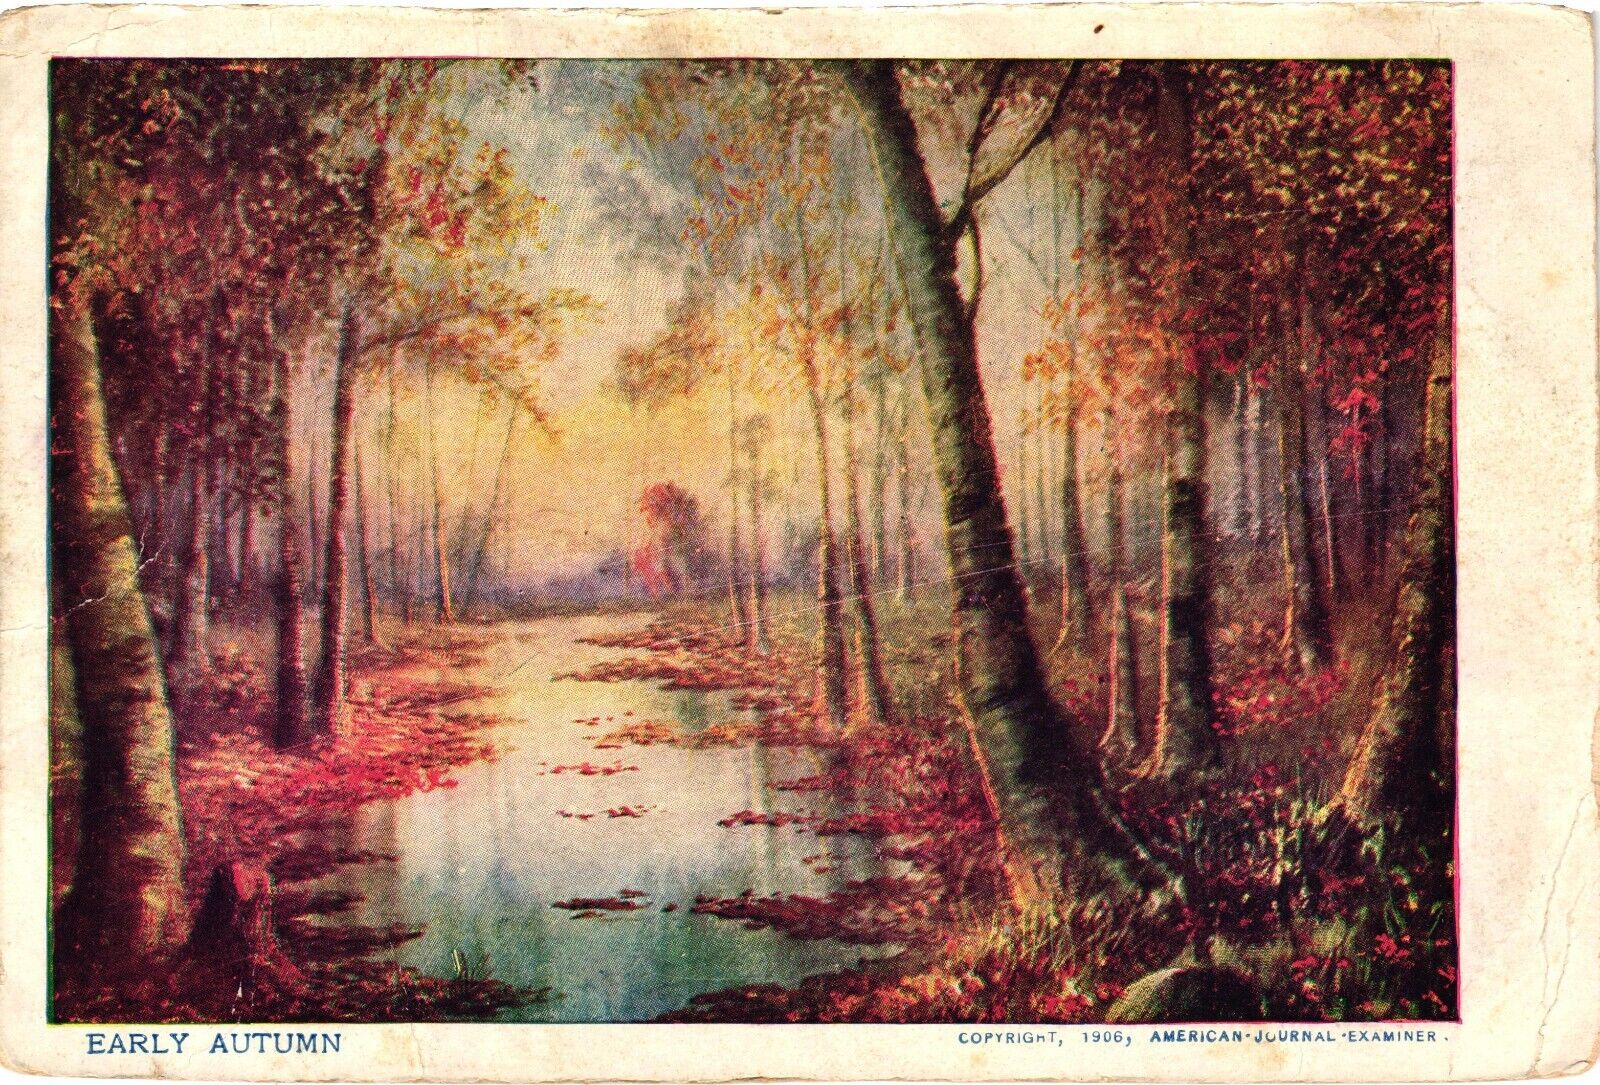 Antique Postcard 1906 by American Journal Examiner - Early Autumn